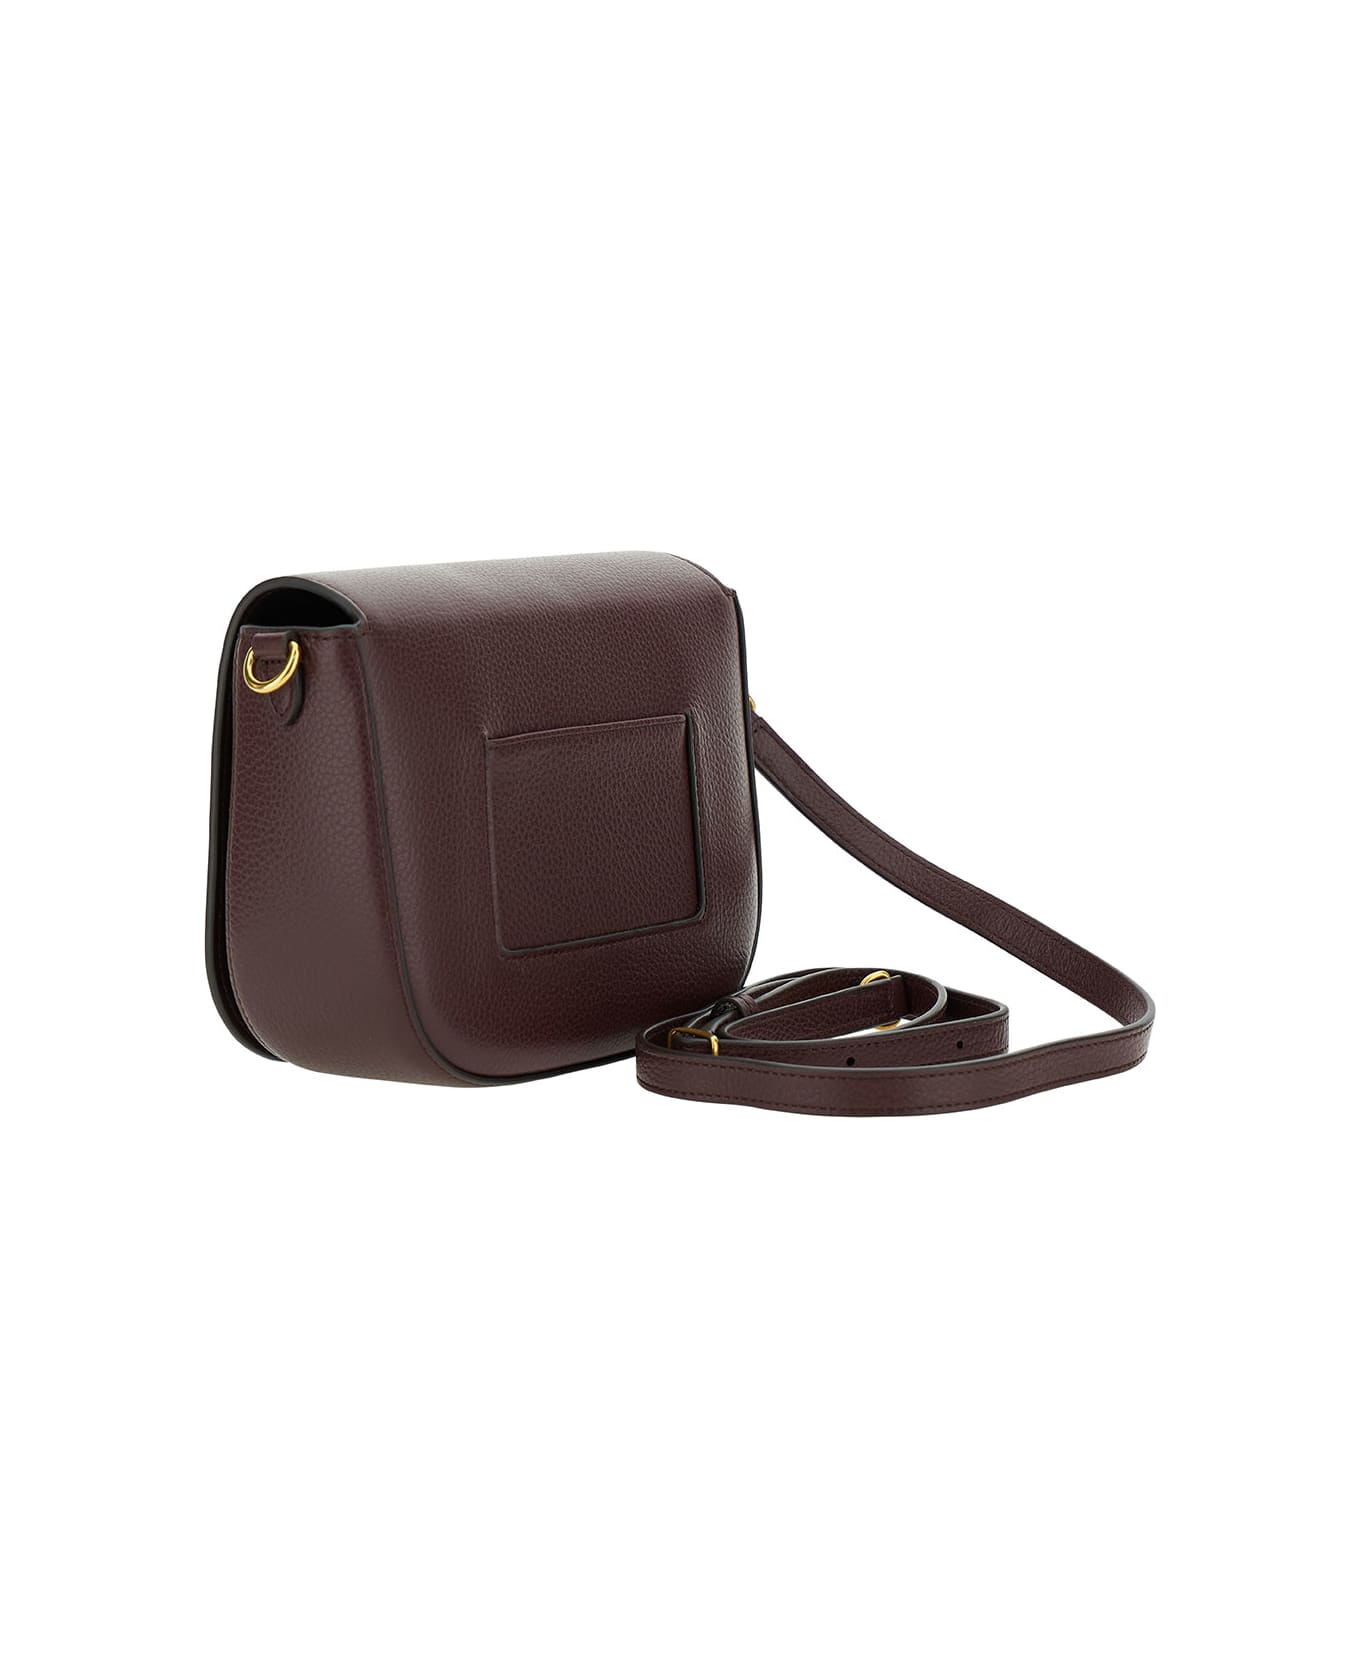 Mulberry Brown Crossbody Bag With Engraved Logo Detail In Hammered Leather Woman - Brown